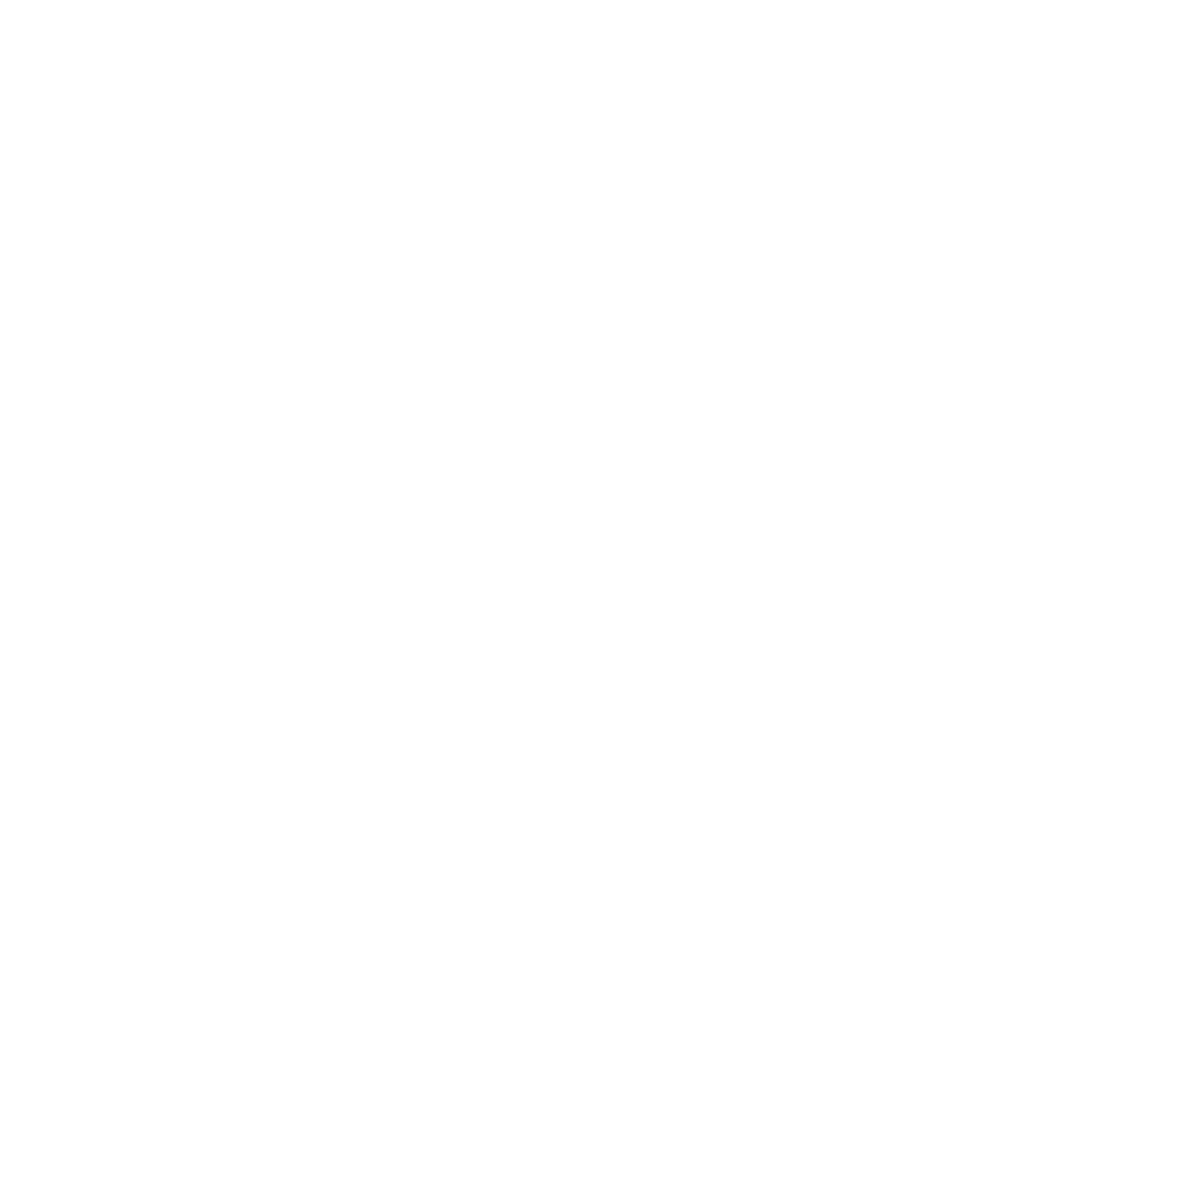 An animated cat